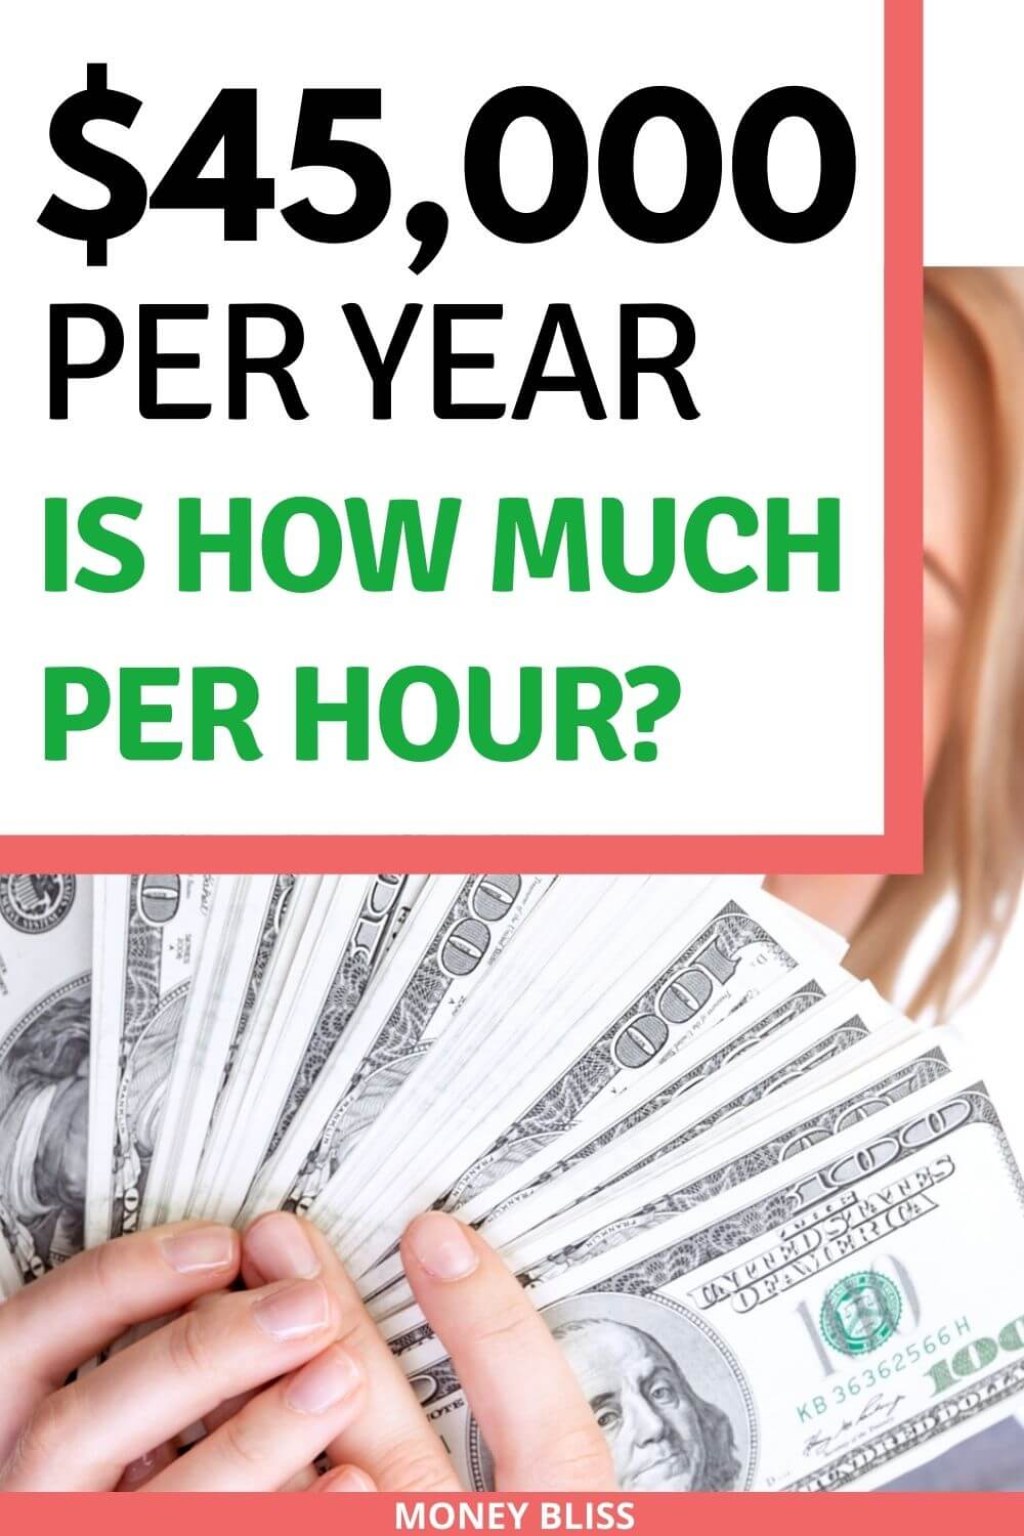 budgeting on 45 000 salary - $ a Year is How Much an Hour? Good Salary or No? - Money Bliss